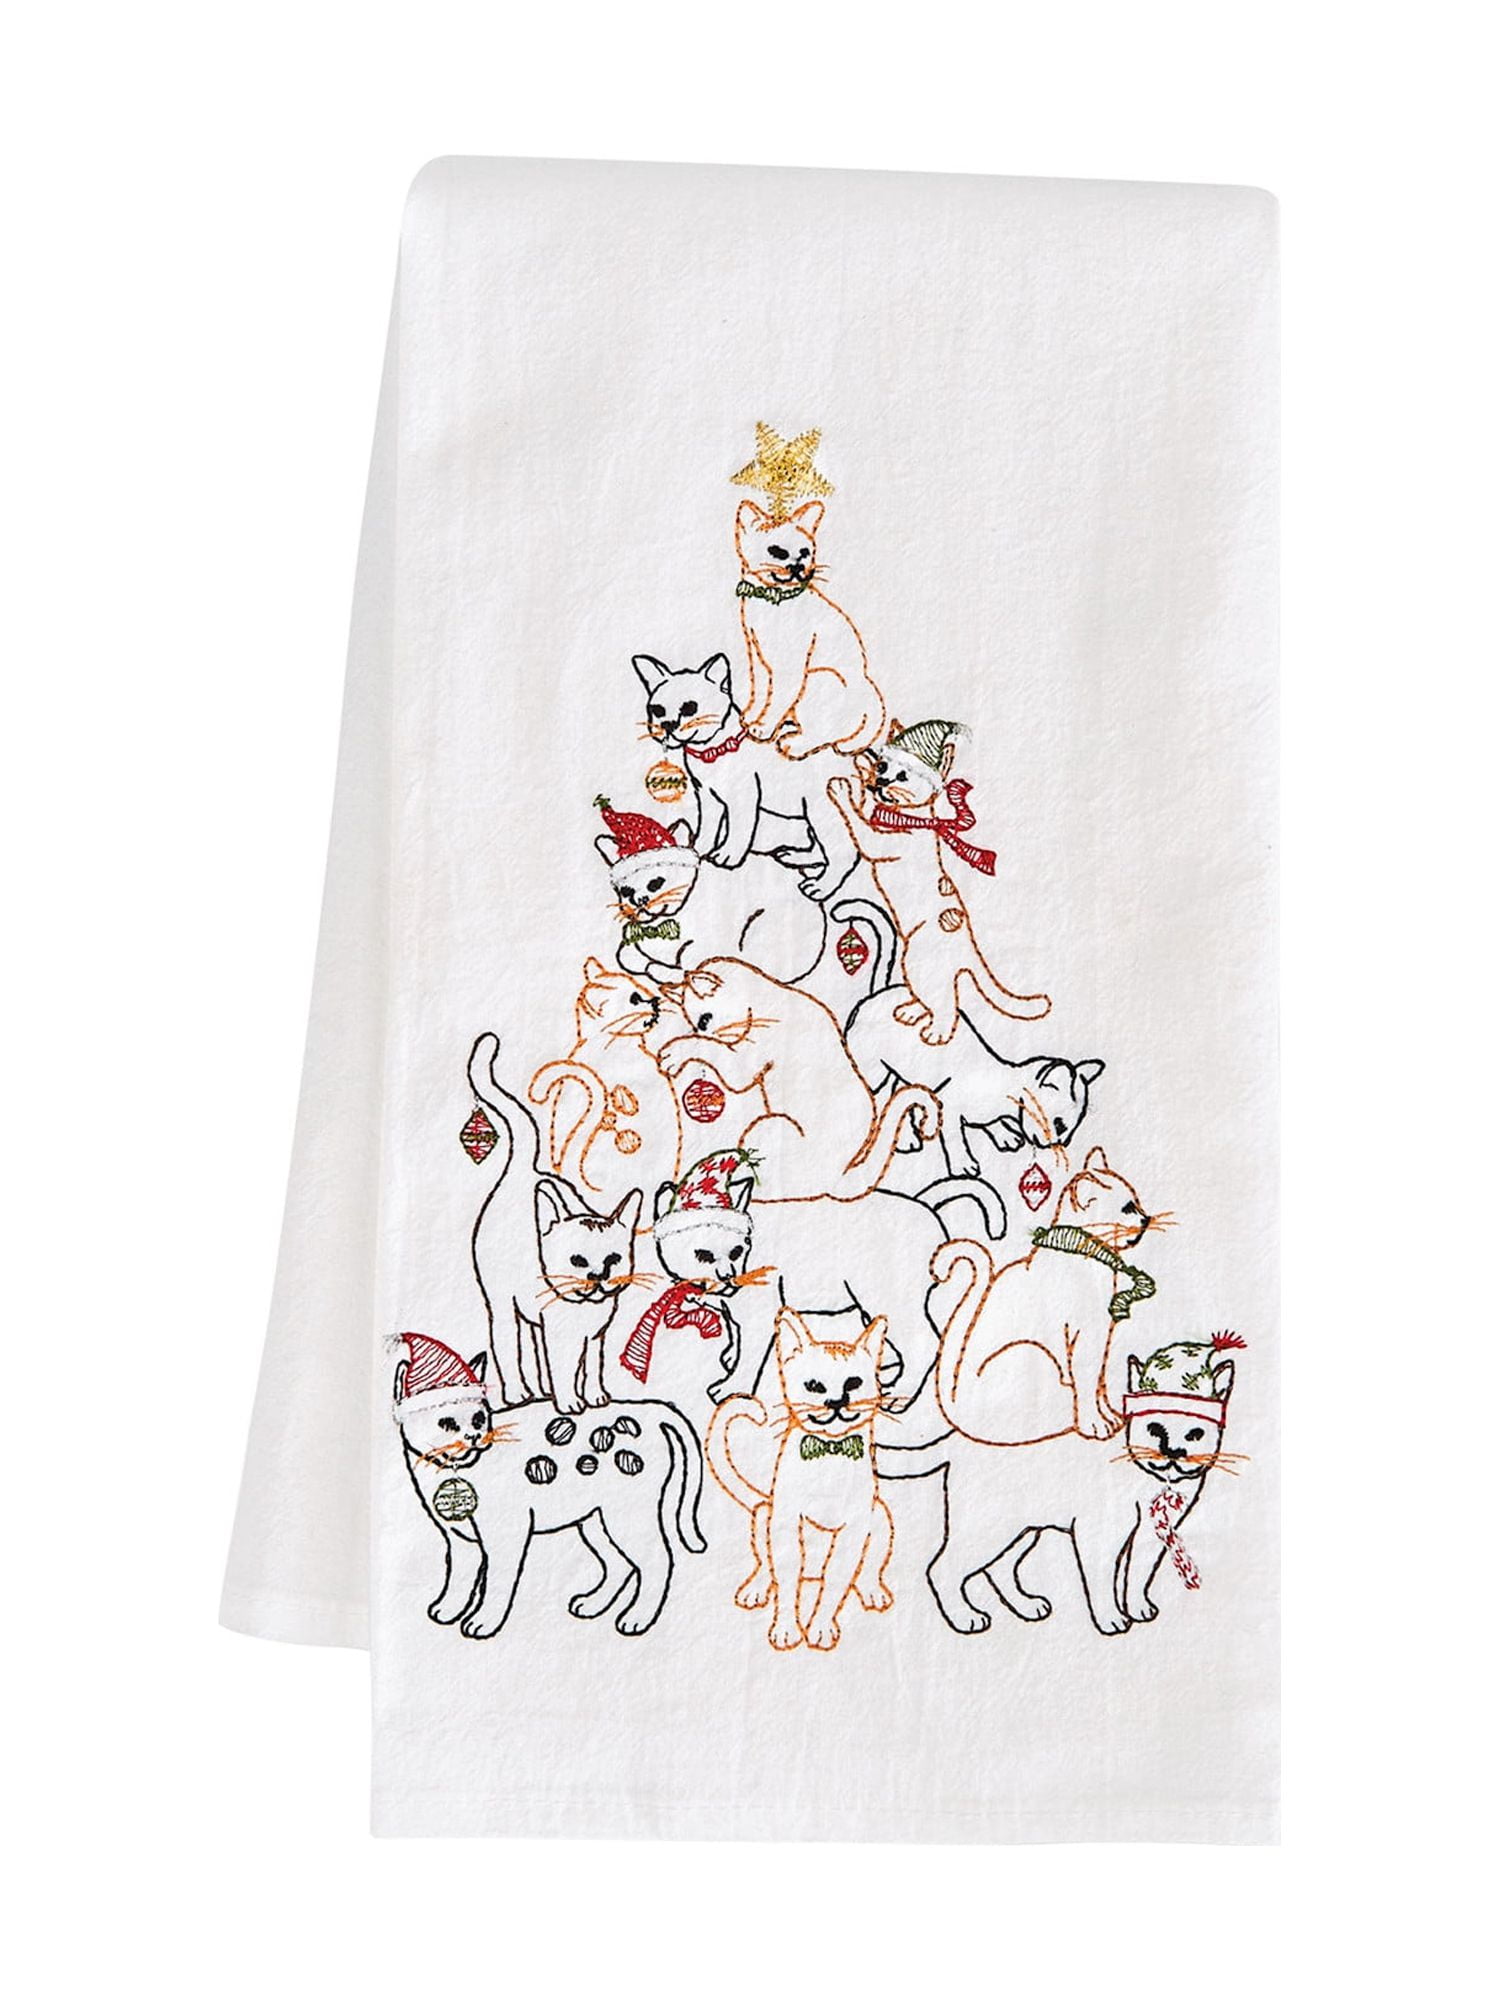  Siilues Christmas Kitchen Towels Set of 2, 18x26 Inch